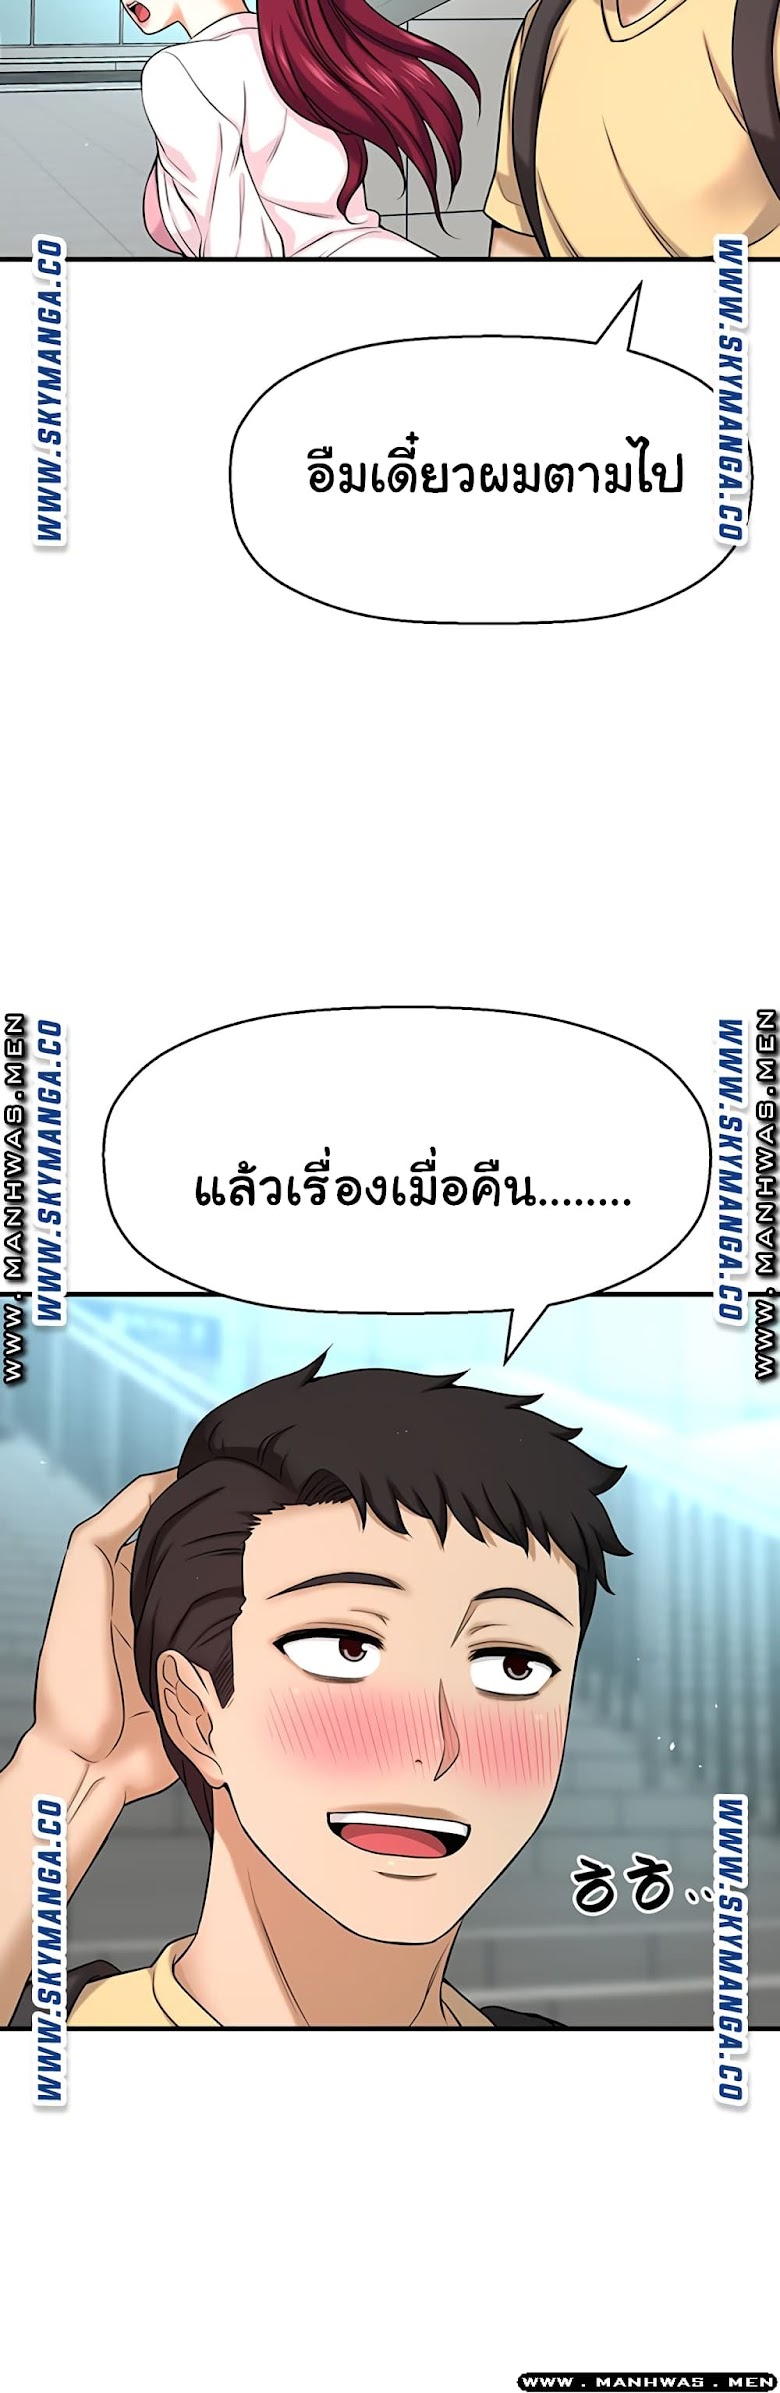 I Want to Know Her - หน้า 56